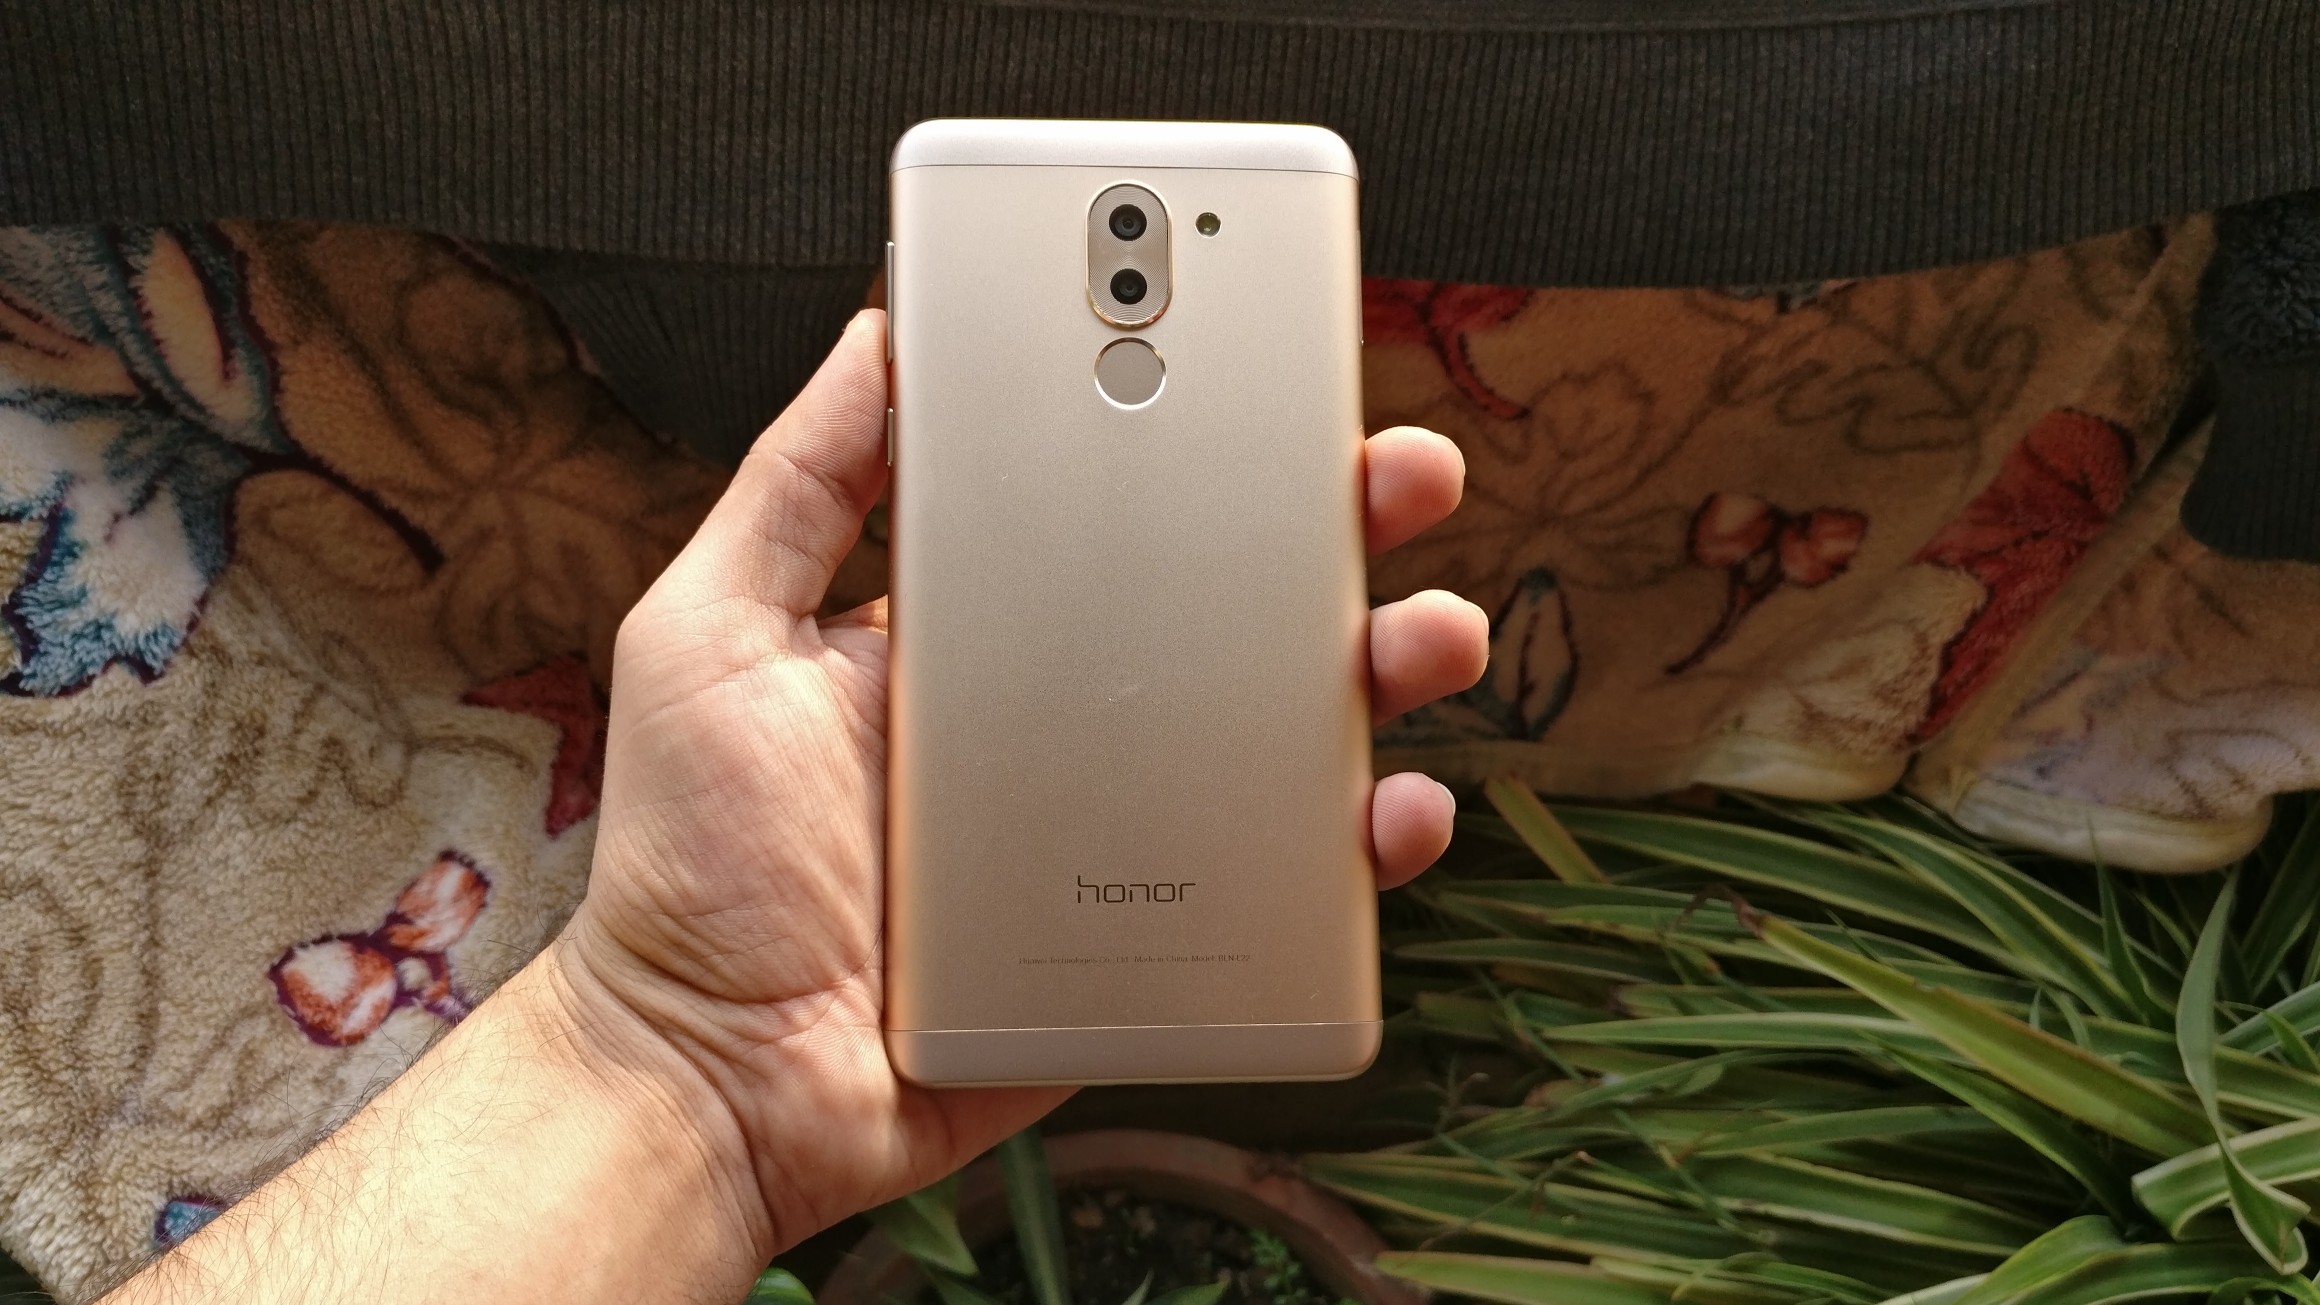 Honor 6X to get Android Nougat update in March 2017